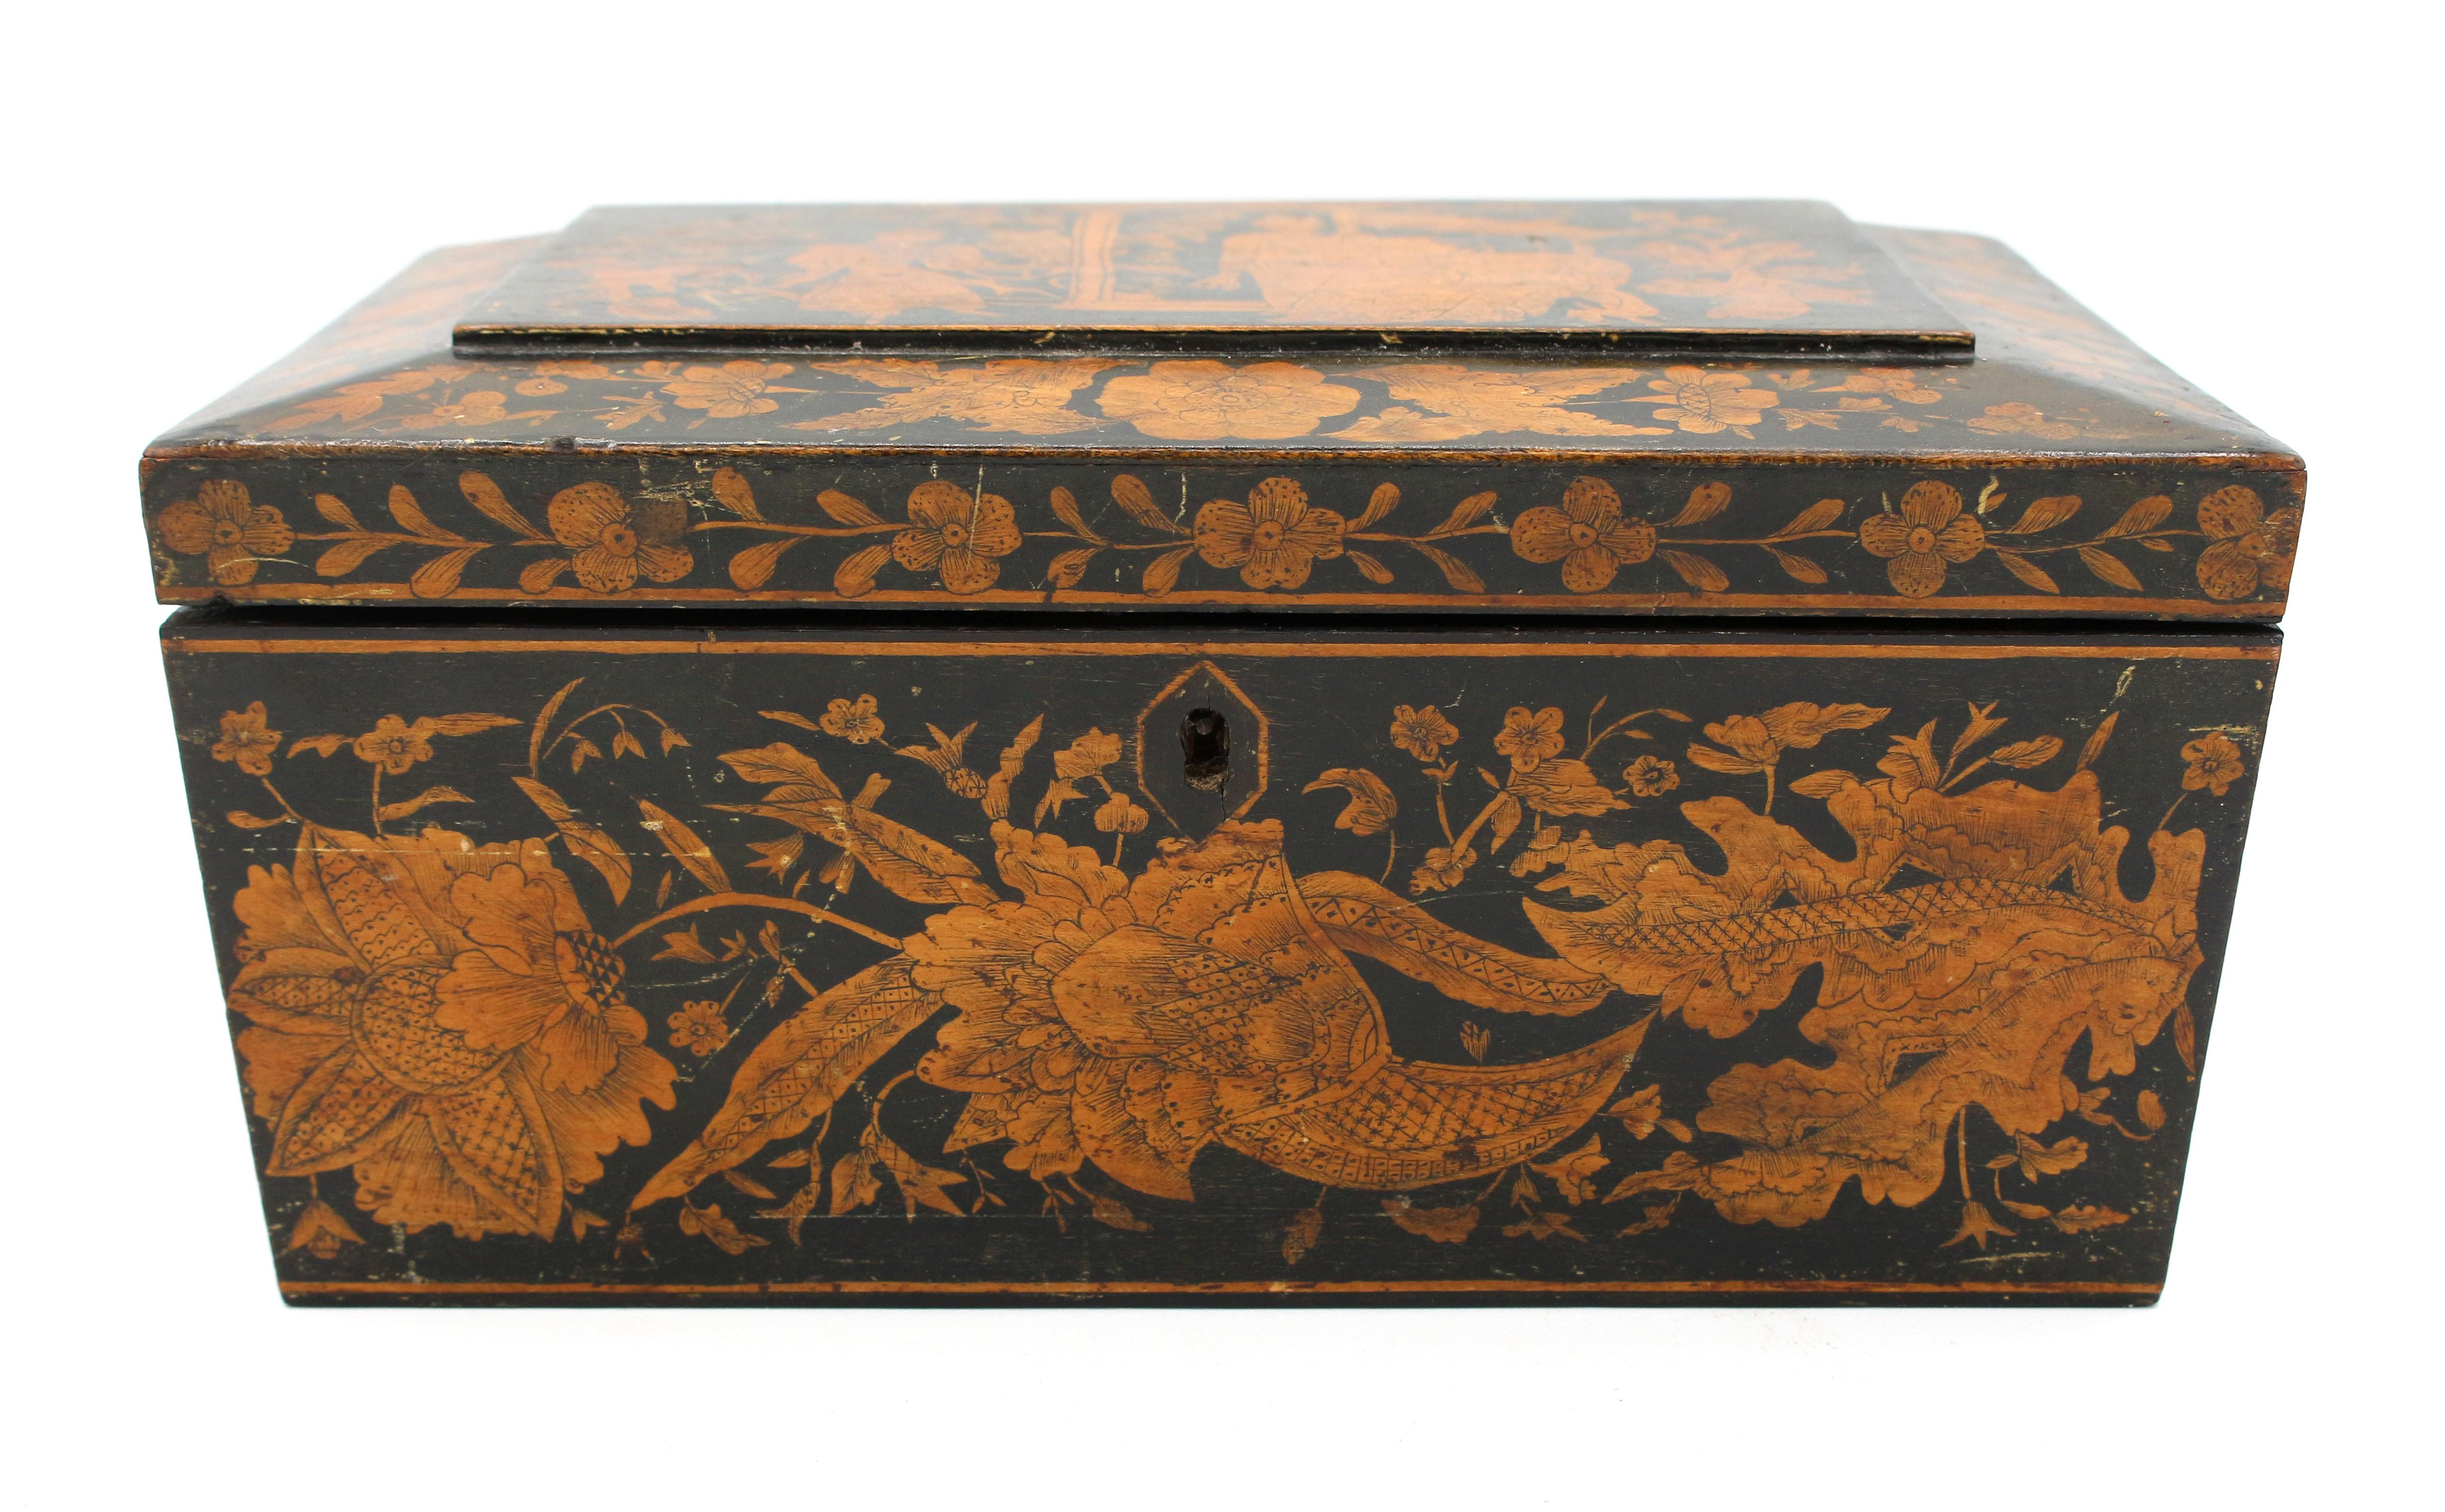 Circa 1830s English penwork box, Regency to George IV. Sarcophagus form; decorated with a large Asiatic panel with floral sides & borders. Replaced lion mask ring handles. Lacks interior jewelry tray & ball feet. Scuffs typical of this delicate form